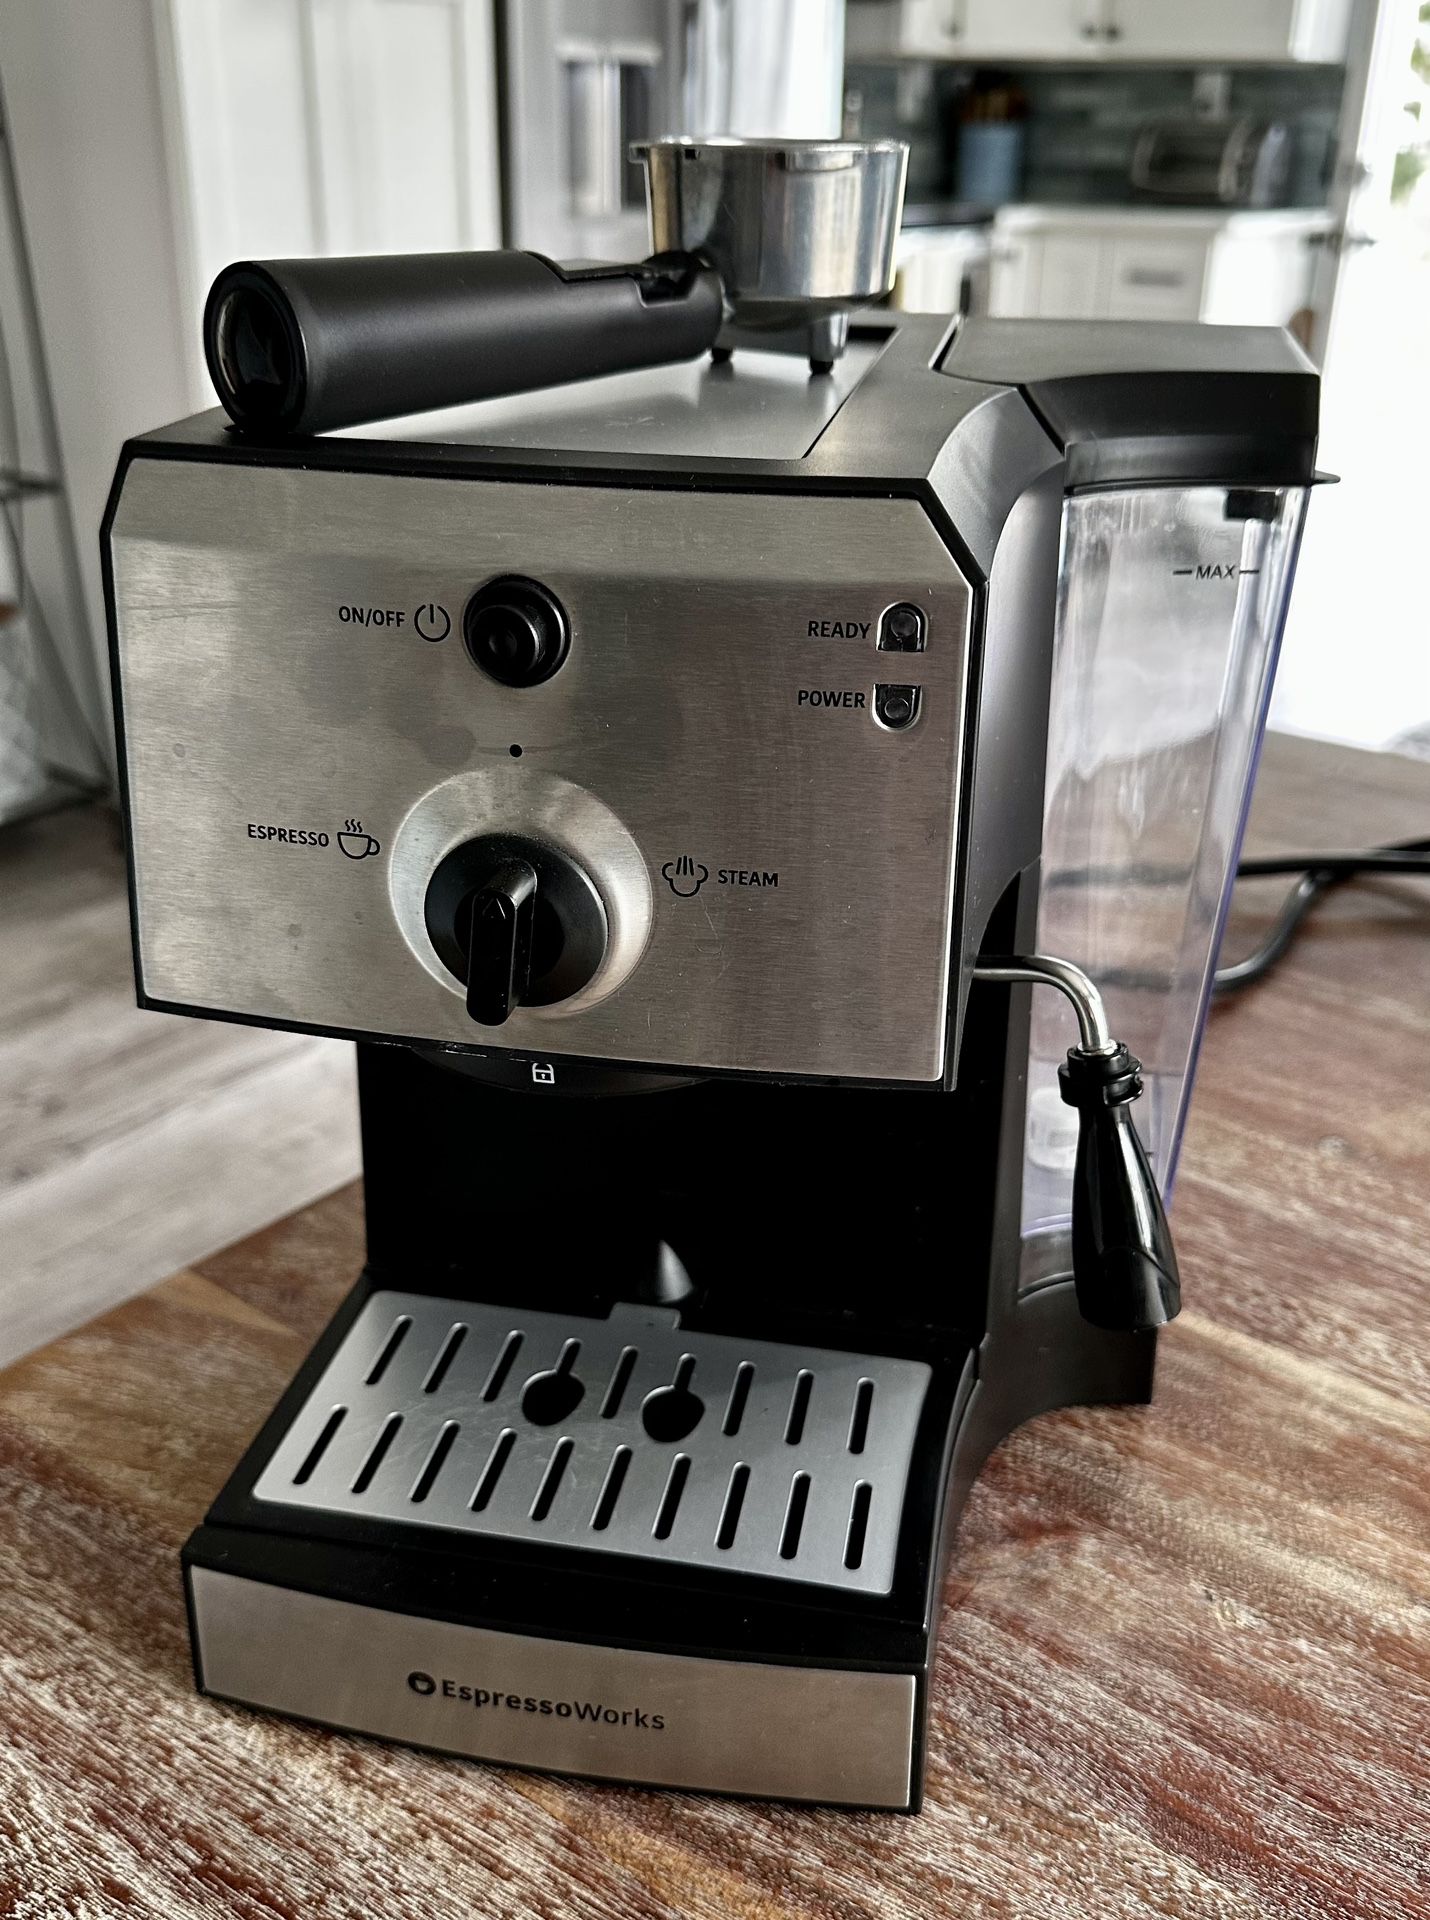 All About EspressoWorks' All-in-one Espresso Machines